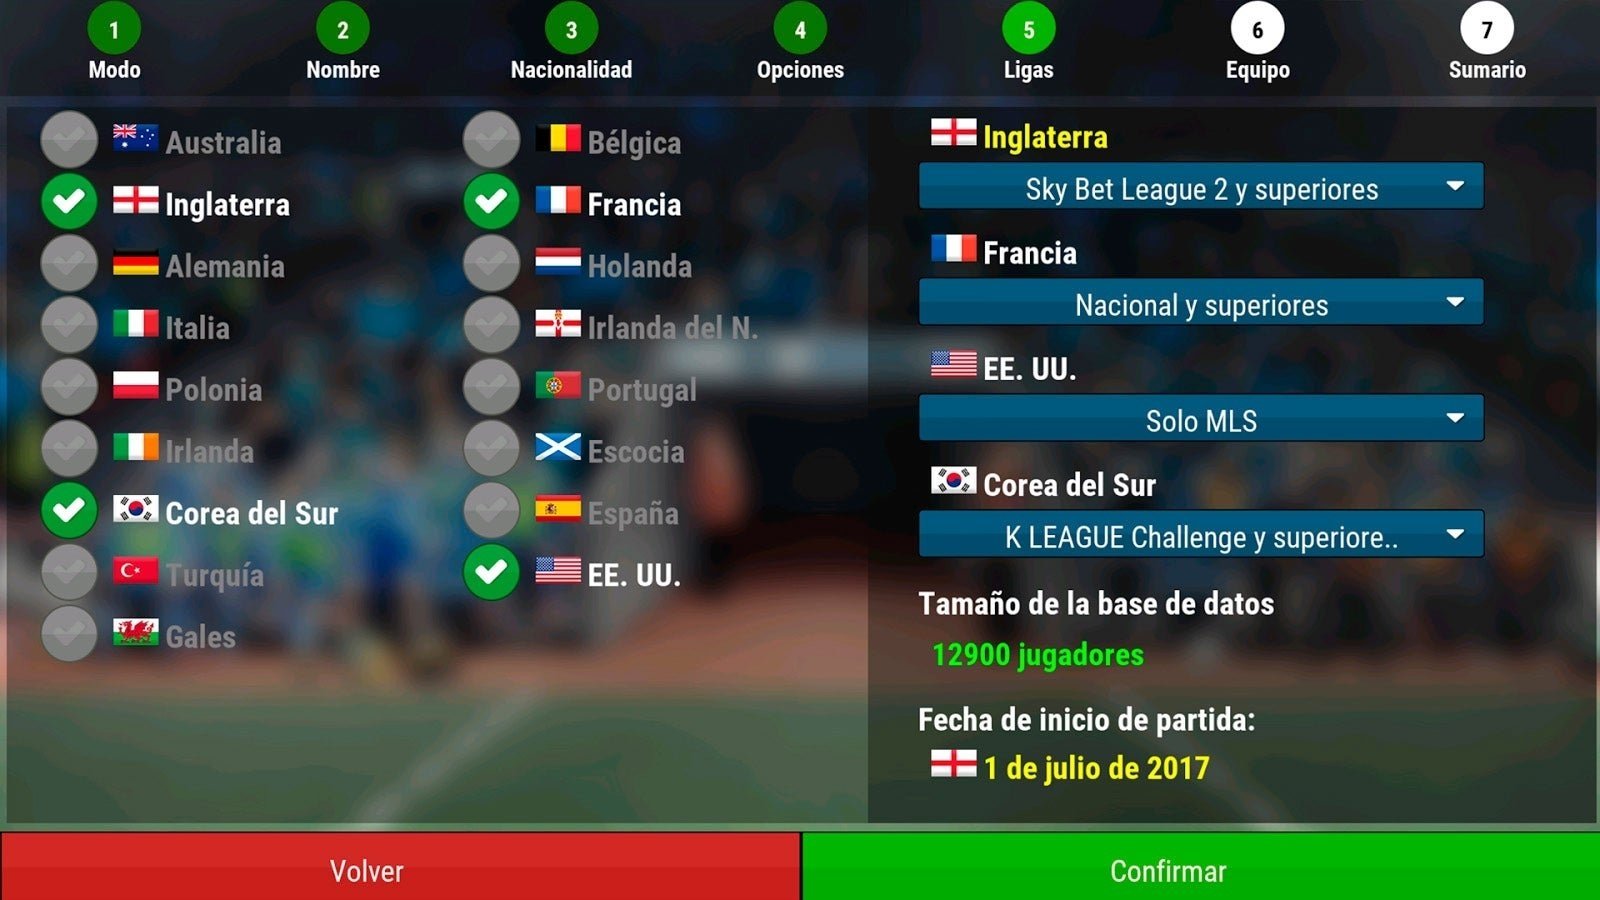 football-manager-2018